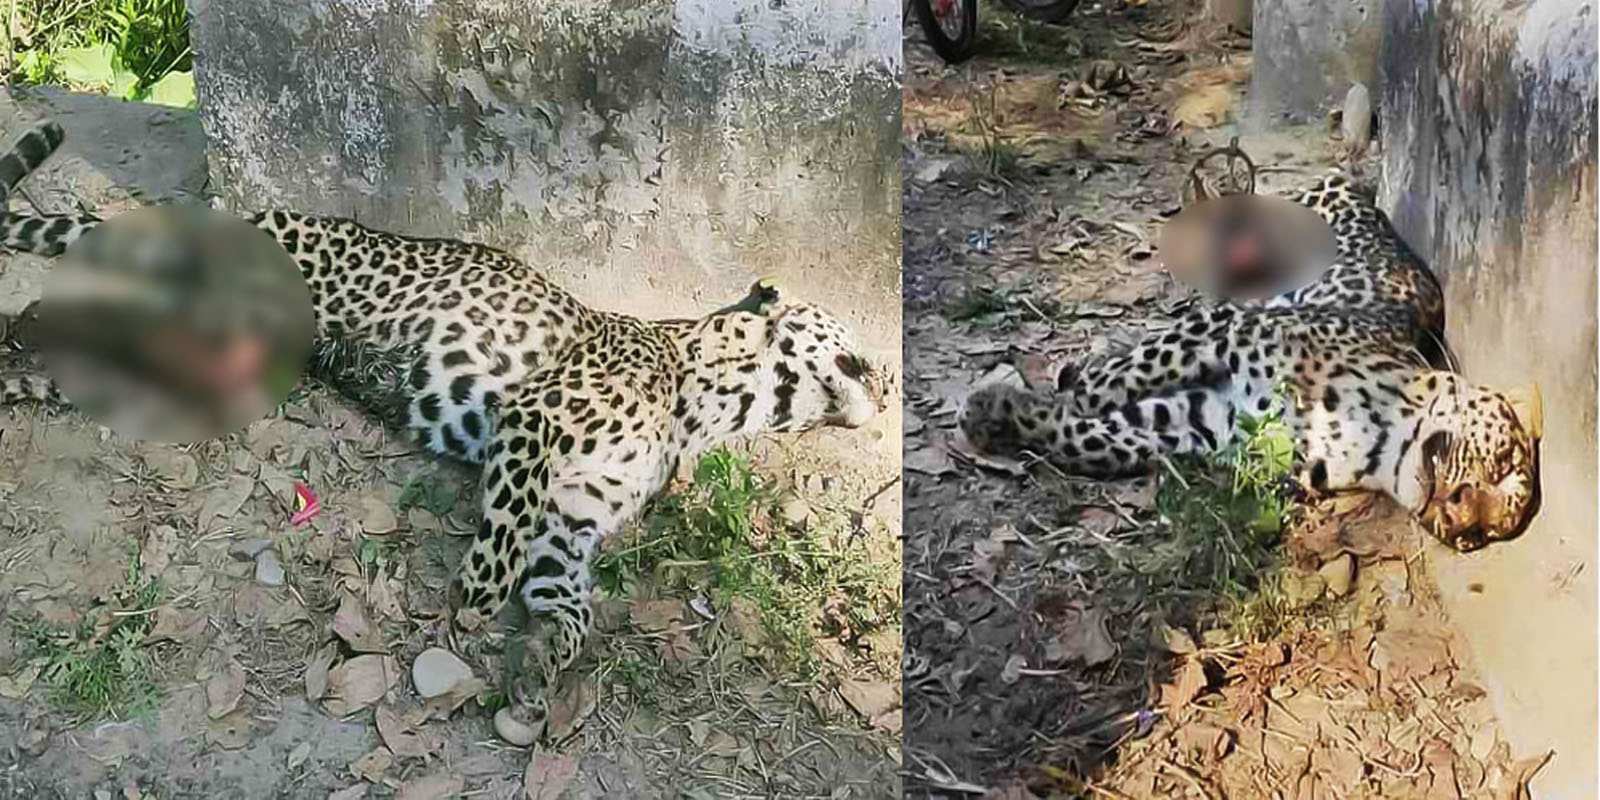 Leopard Maimed by Illegal Trap Gets Cruel Death, Locals Blame Forest Deptt for Inaction